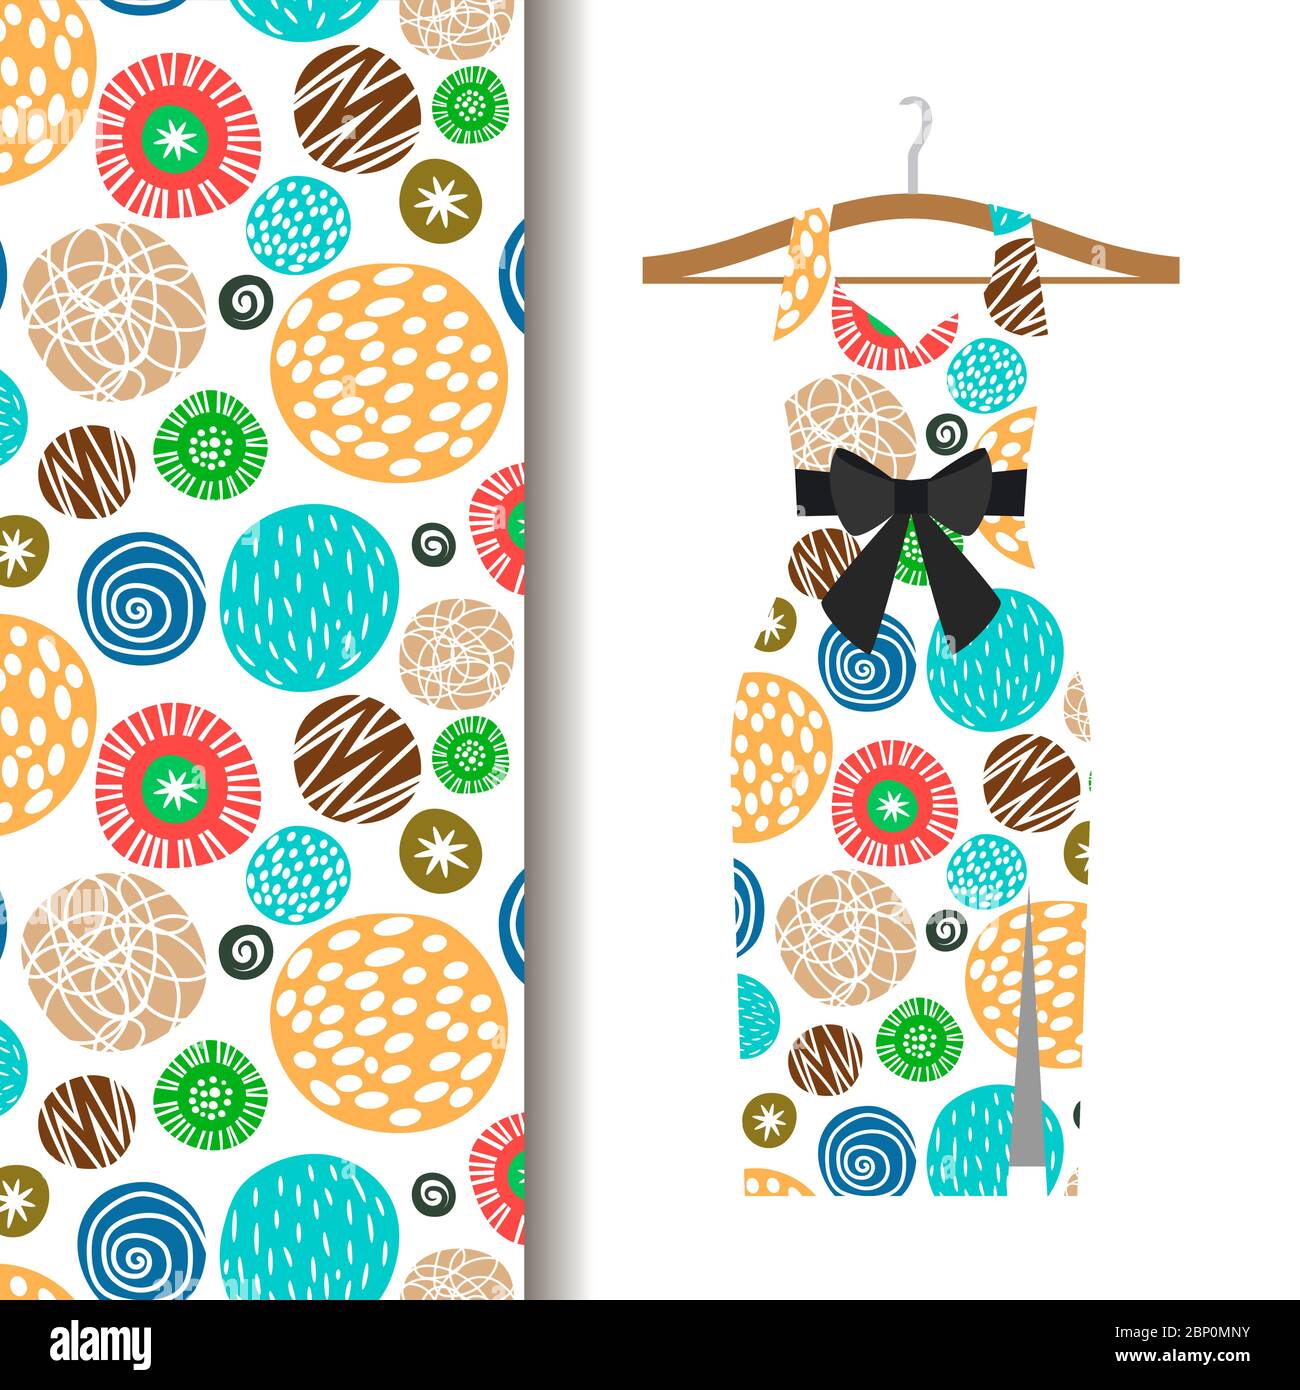 Women dress fabric pattern design on a hanger with polka dots. Vector illustration Stock Vector